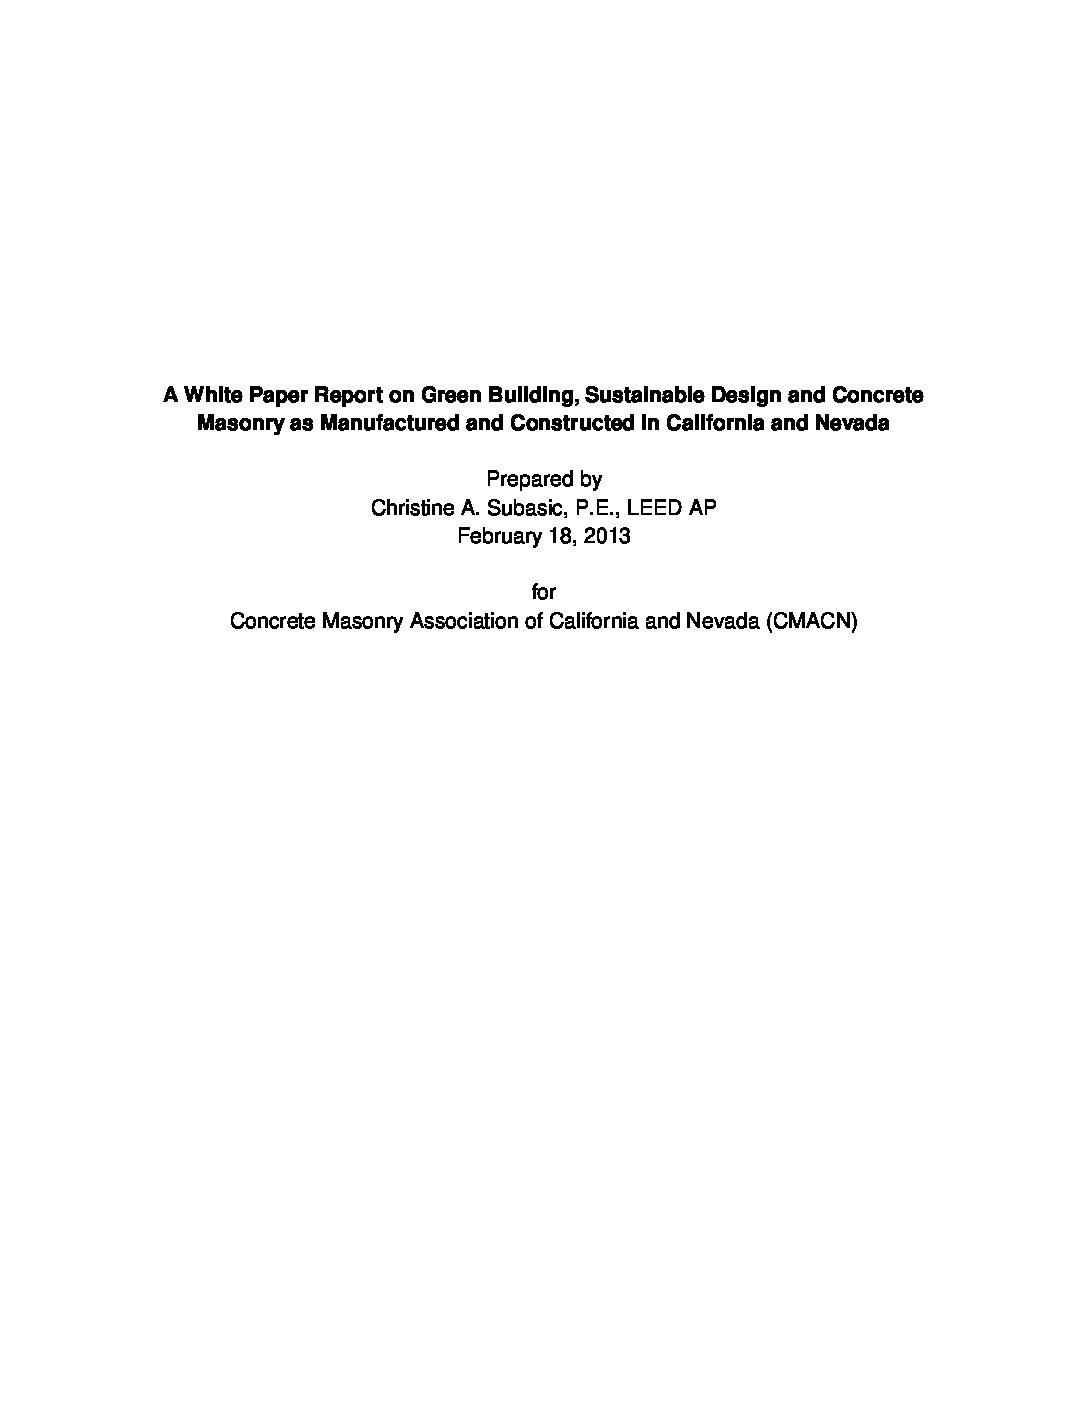 White Paper Report on Green Building, Sustainable Design and Concrete Masonry as Manufactured and Constructed in California and Nevada